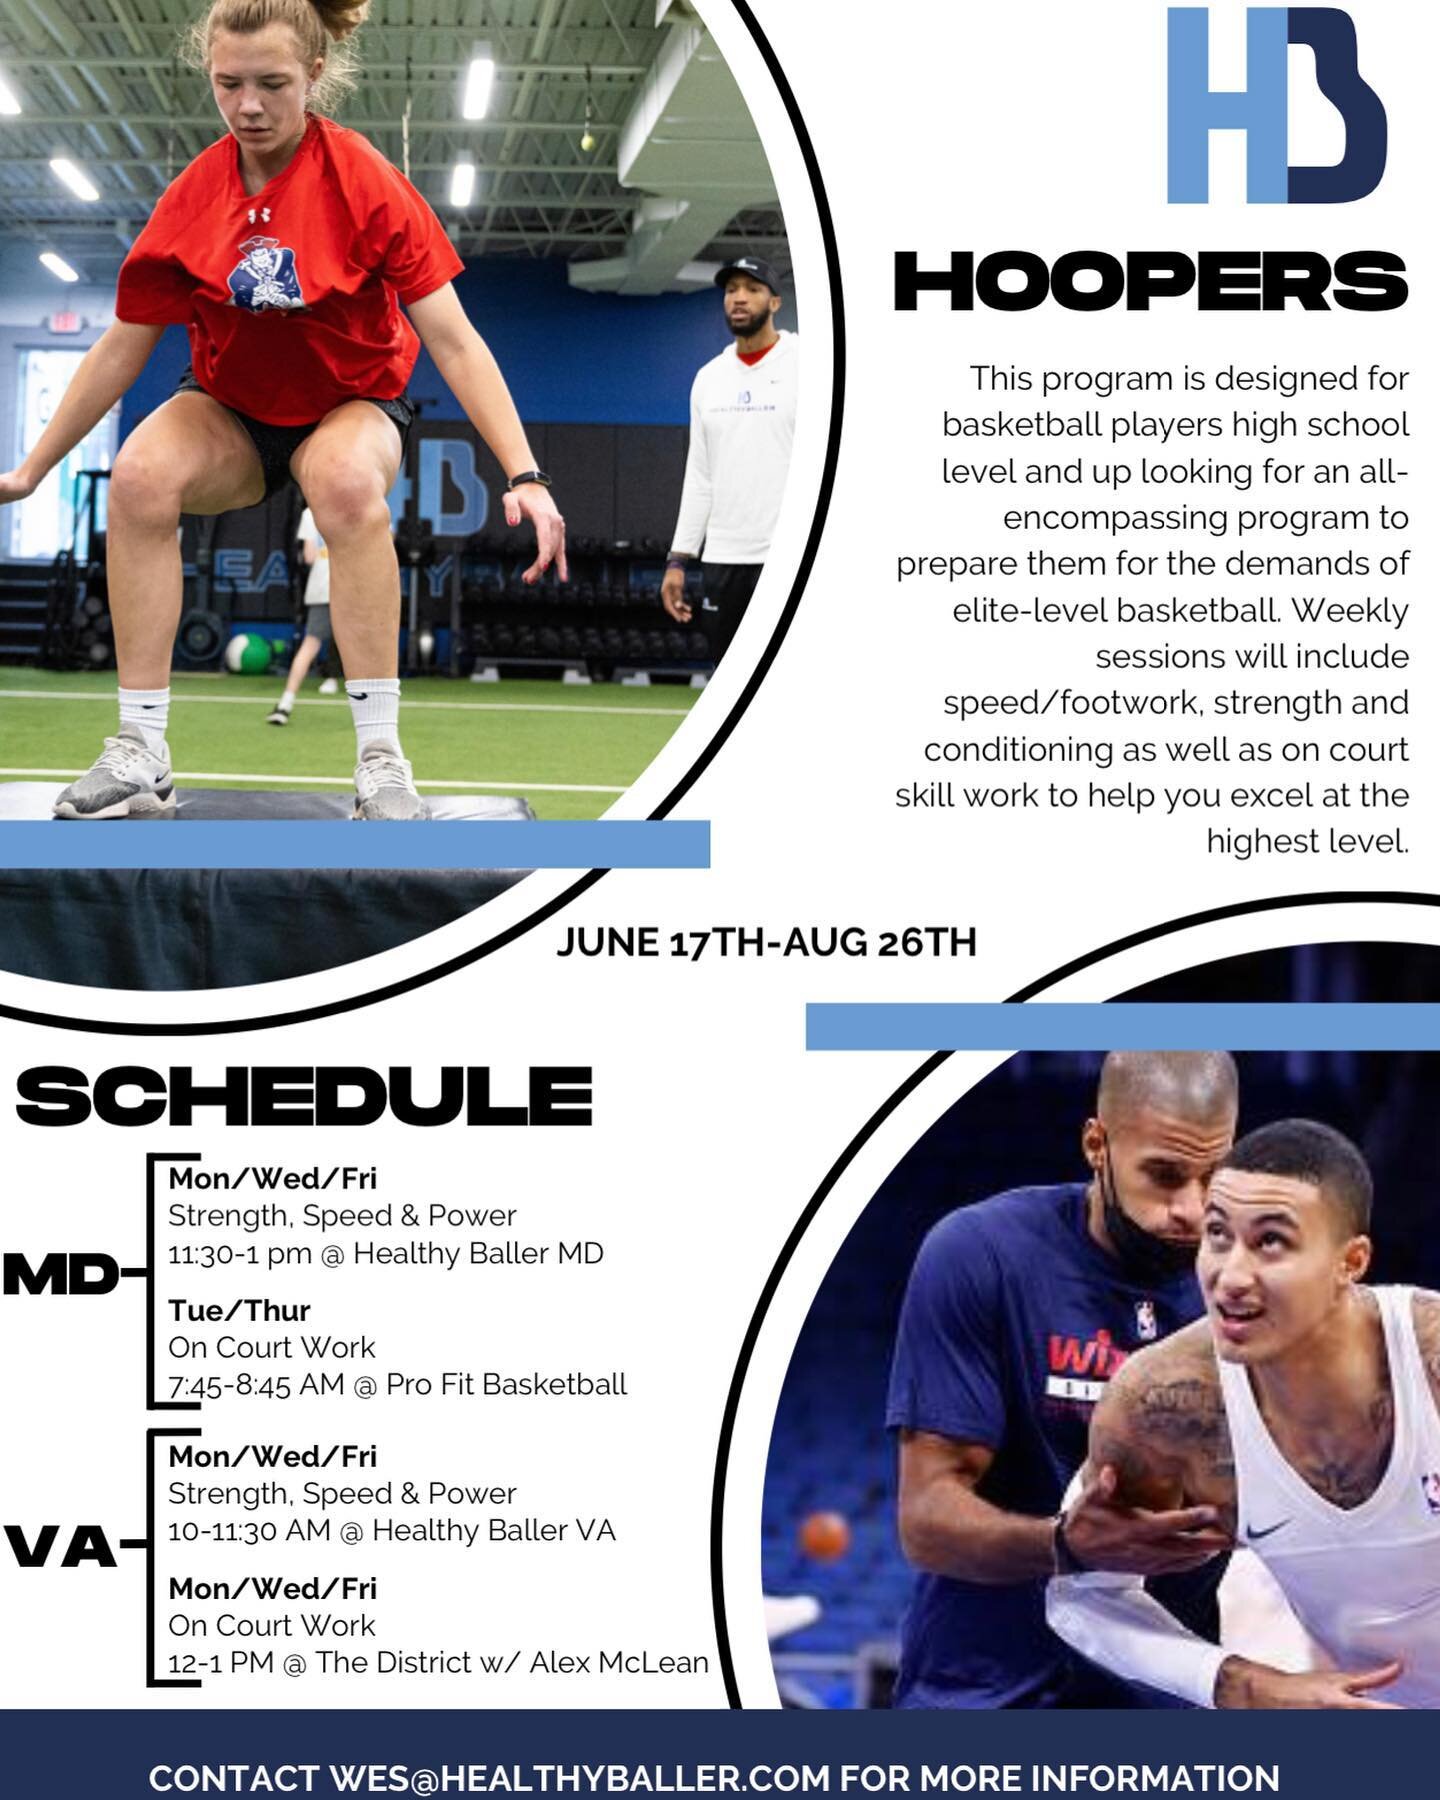 Our Hoopers Program is back and better than ever!  If you&rsquo;re a serious Hooper looking to take your skills and basketball athleticism to the next level, this is the program for you. 

Weekly skill sessions will be available in both locations (Ro